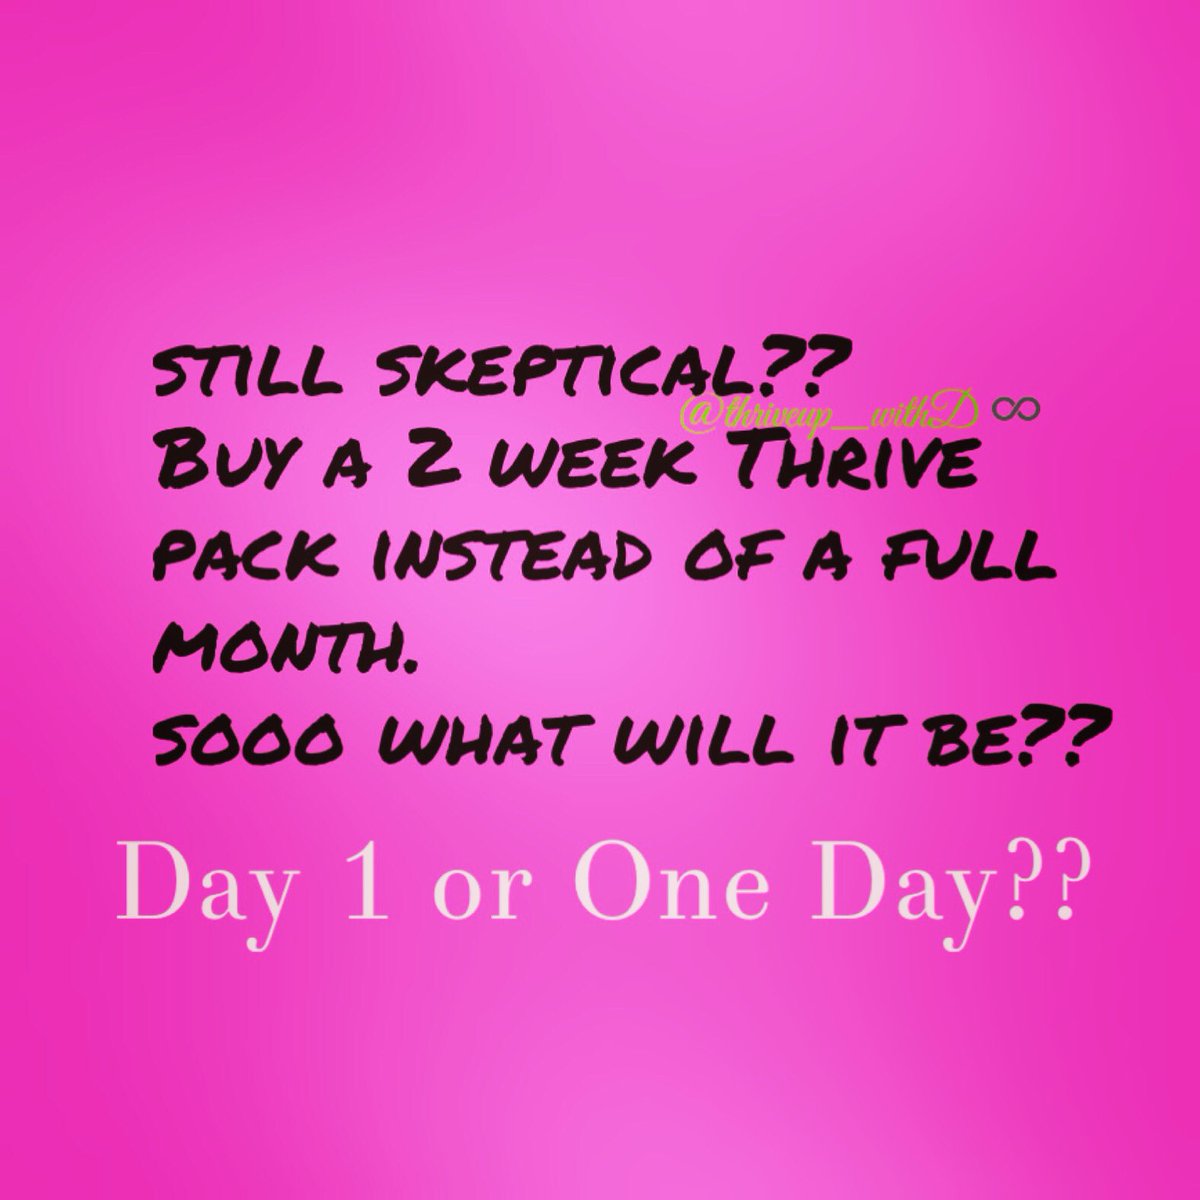 What do you have to gain🤔
#bettersleep #immunesupport 
#weightmanagement
#mentalclarity
#antioxidantsupport 
#digestivesupport #healthyjointfunction #leanmusclesupport #calmsgeneraldiscomfort 
#thrivewithme #whosready #starttoday #nothingtolose #givemetwoweeks #moms #dads  ♾♥️